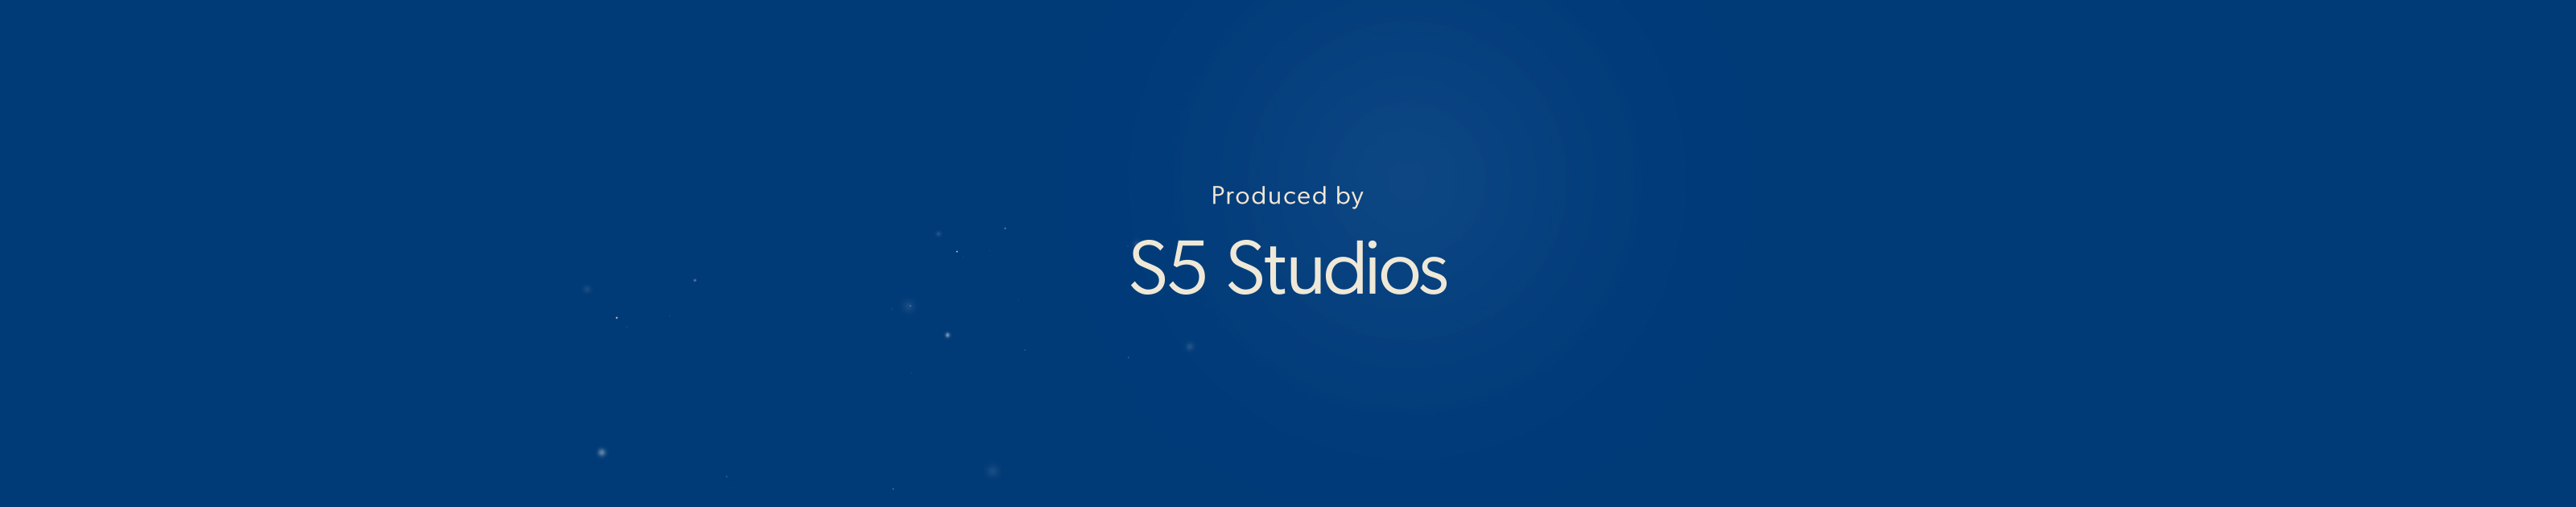 Produced by S5 Studios